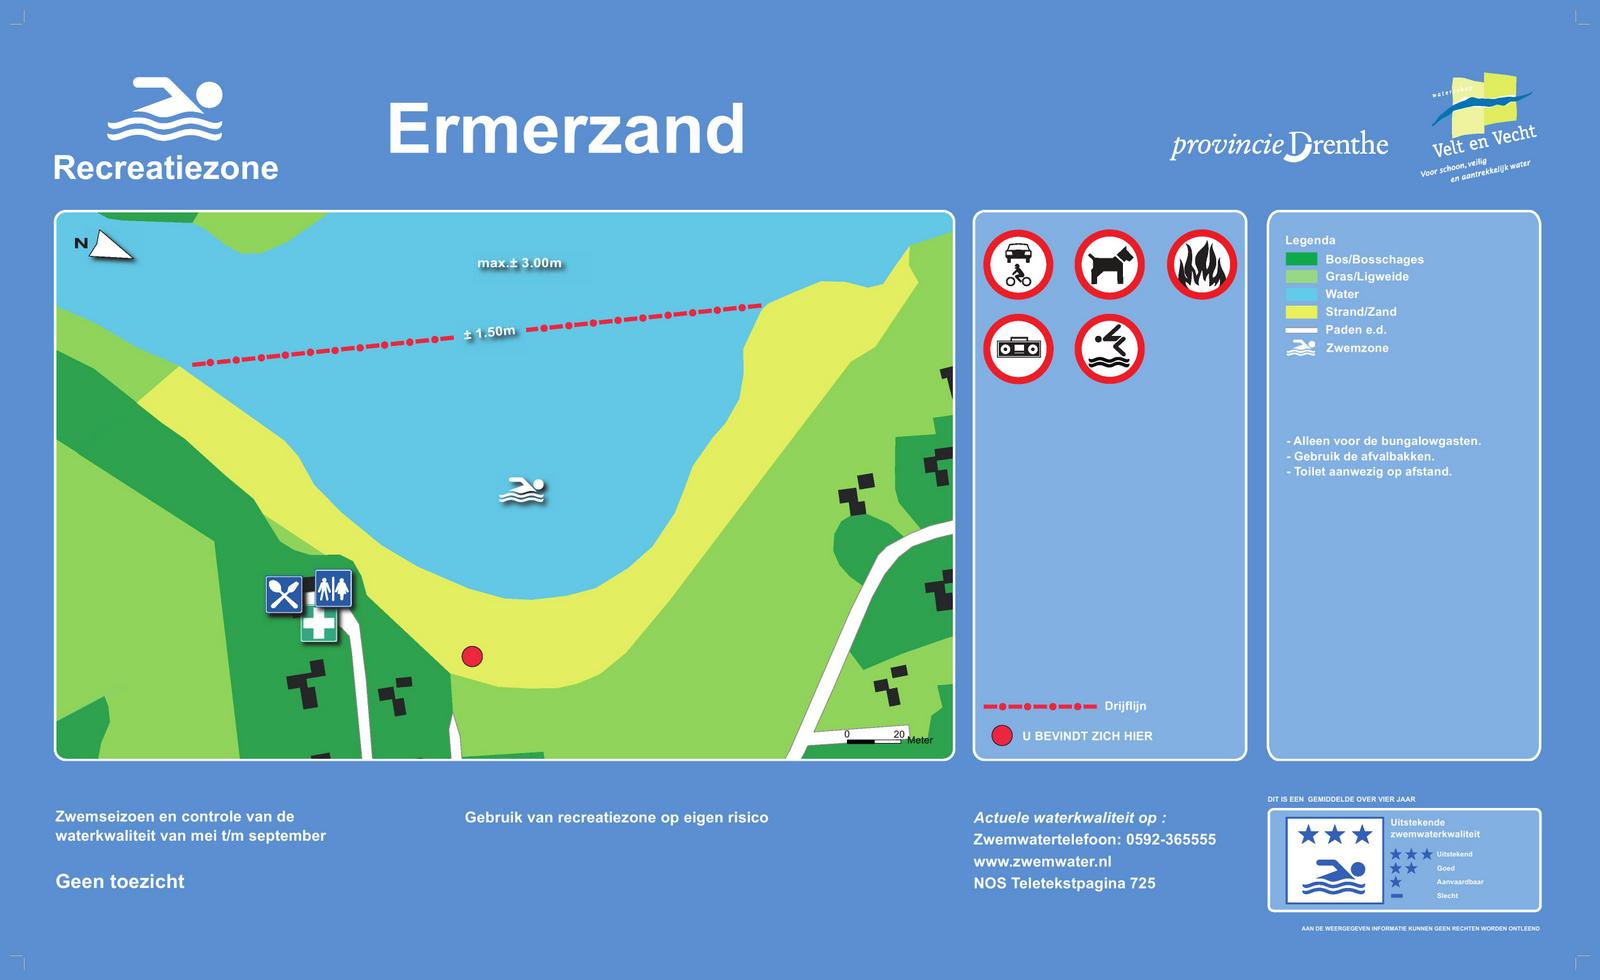 The information board at the swimming location Ermerzand